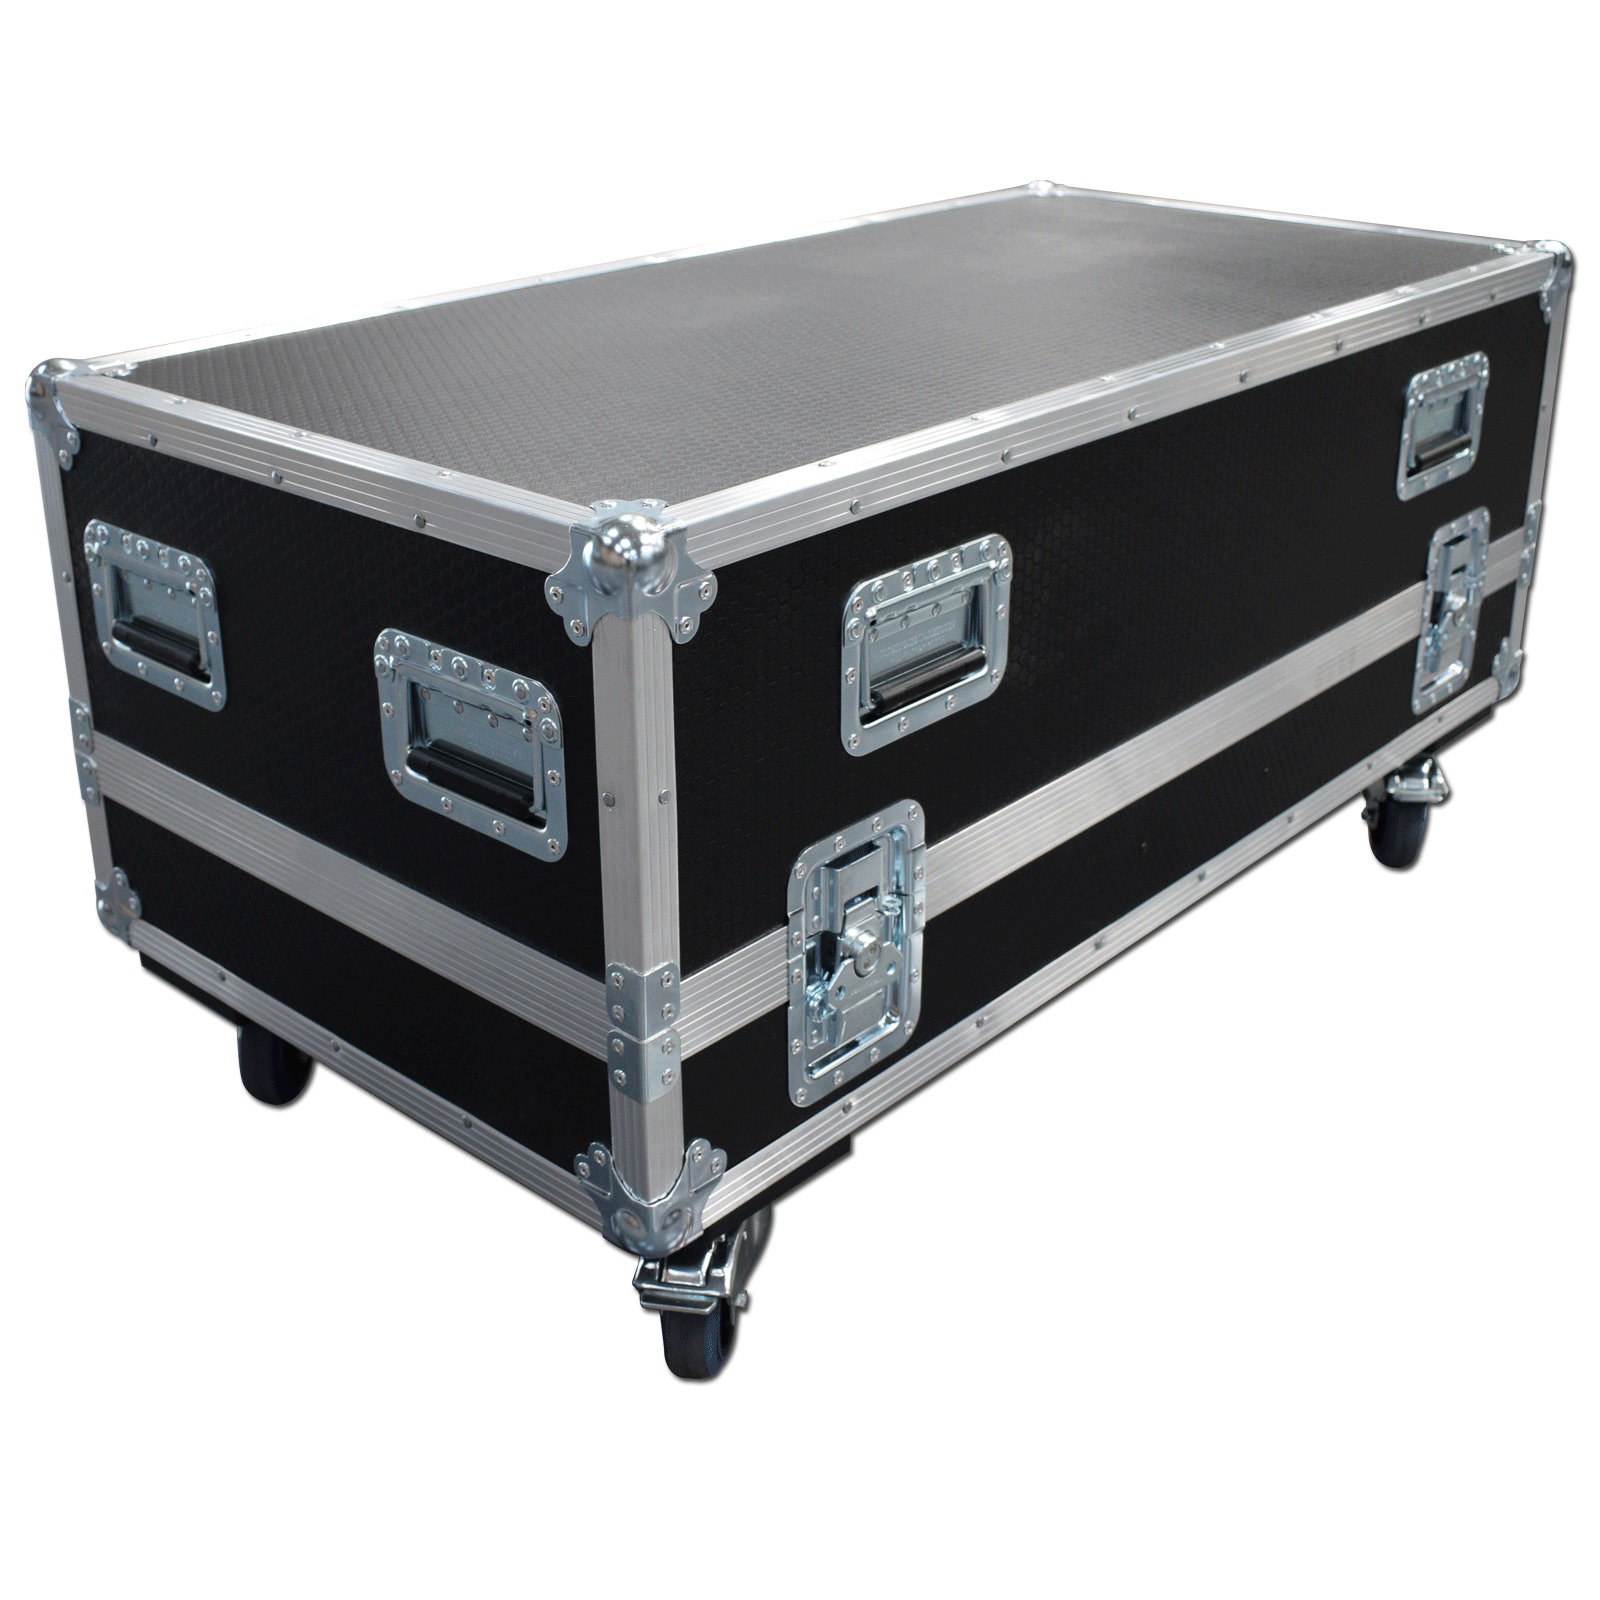 Twin Speaker Flightcase for Funktion 1 Resolution 5 Touring With 150mm Storage Compartment 